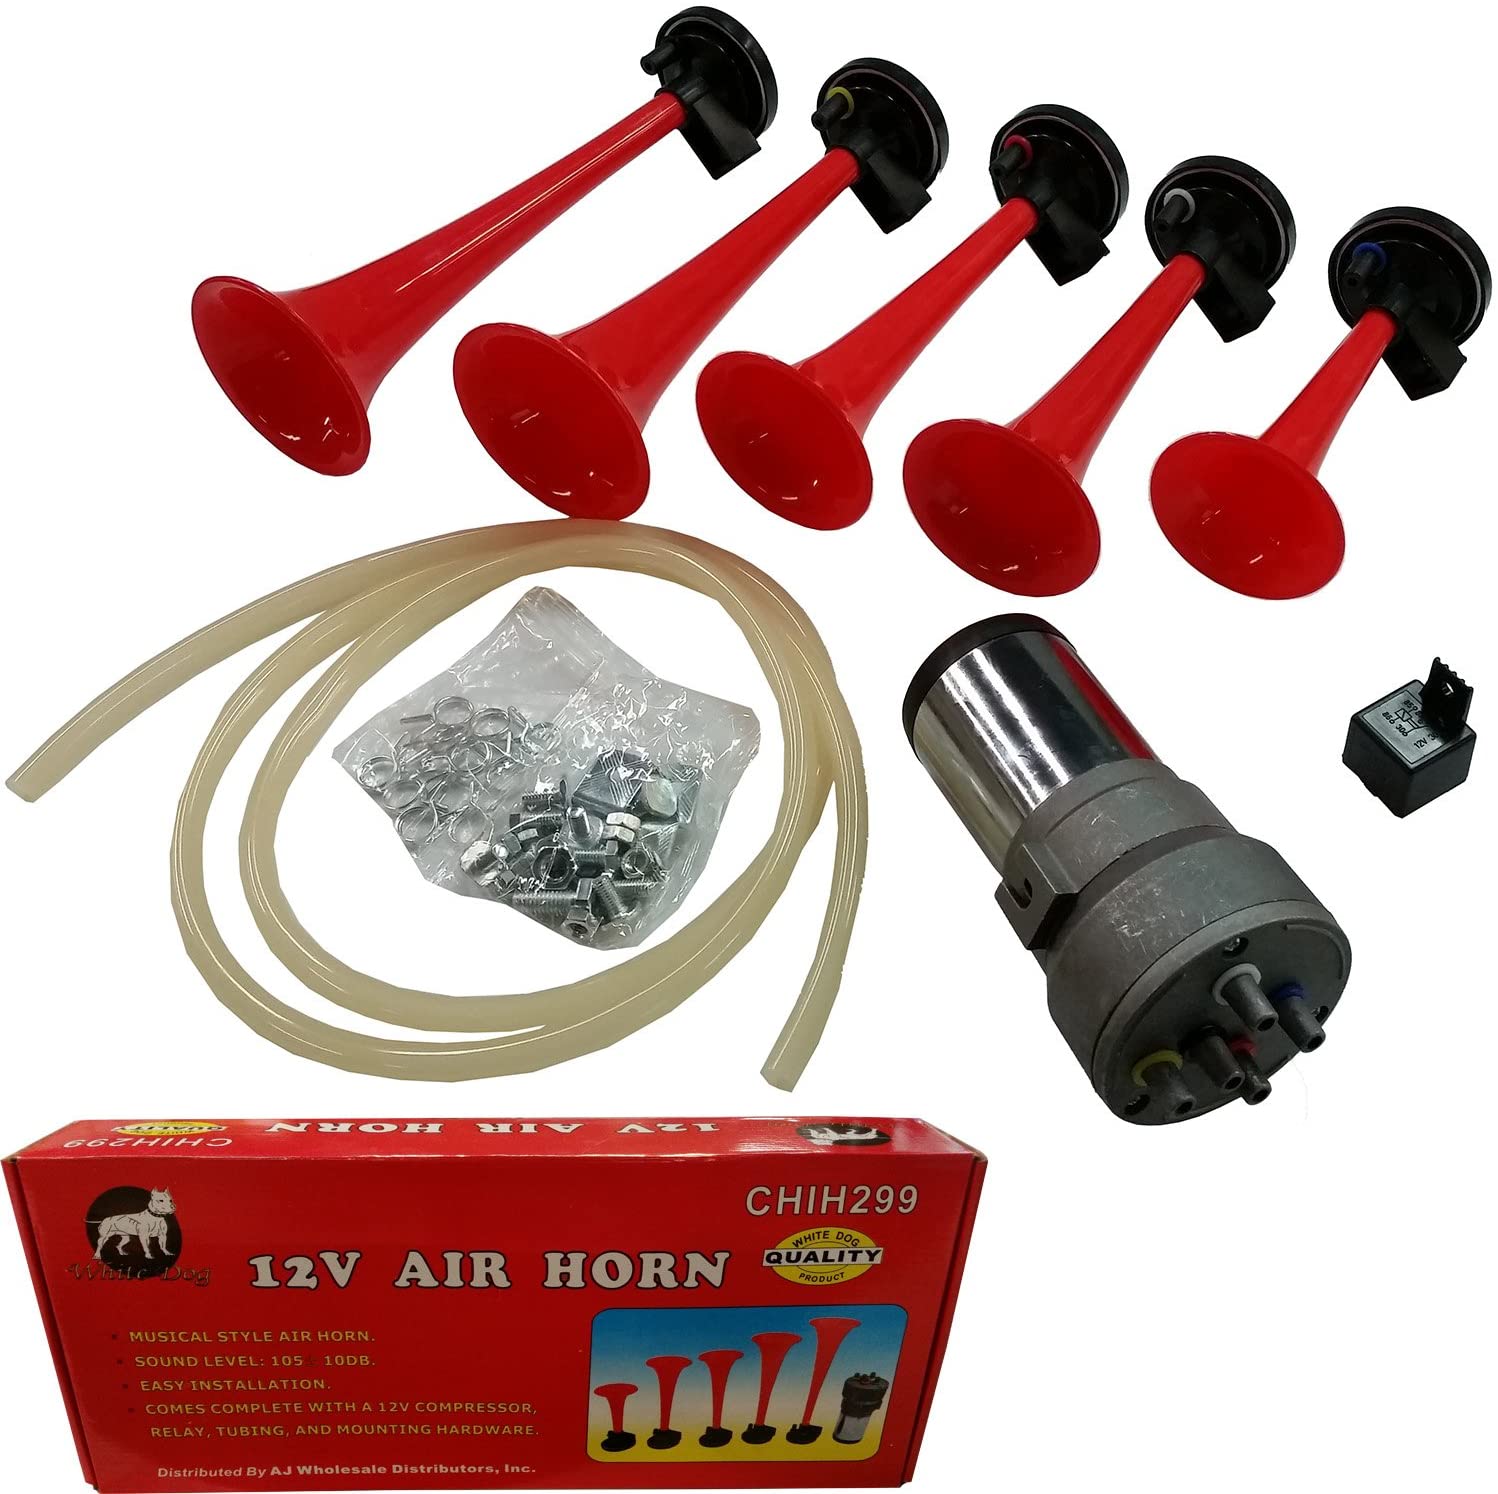 Five Trumpet Air Horn Combo Pack with 12 Volt Air Compressor & All Hardware Needed for Complete Install. Get The Sound You Need for Then Price You Like